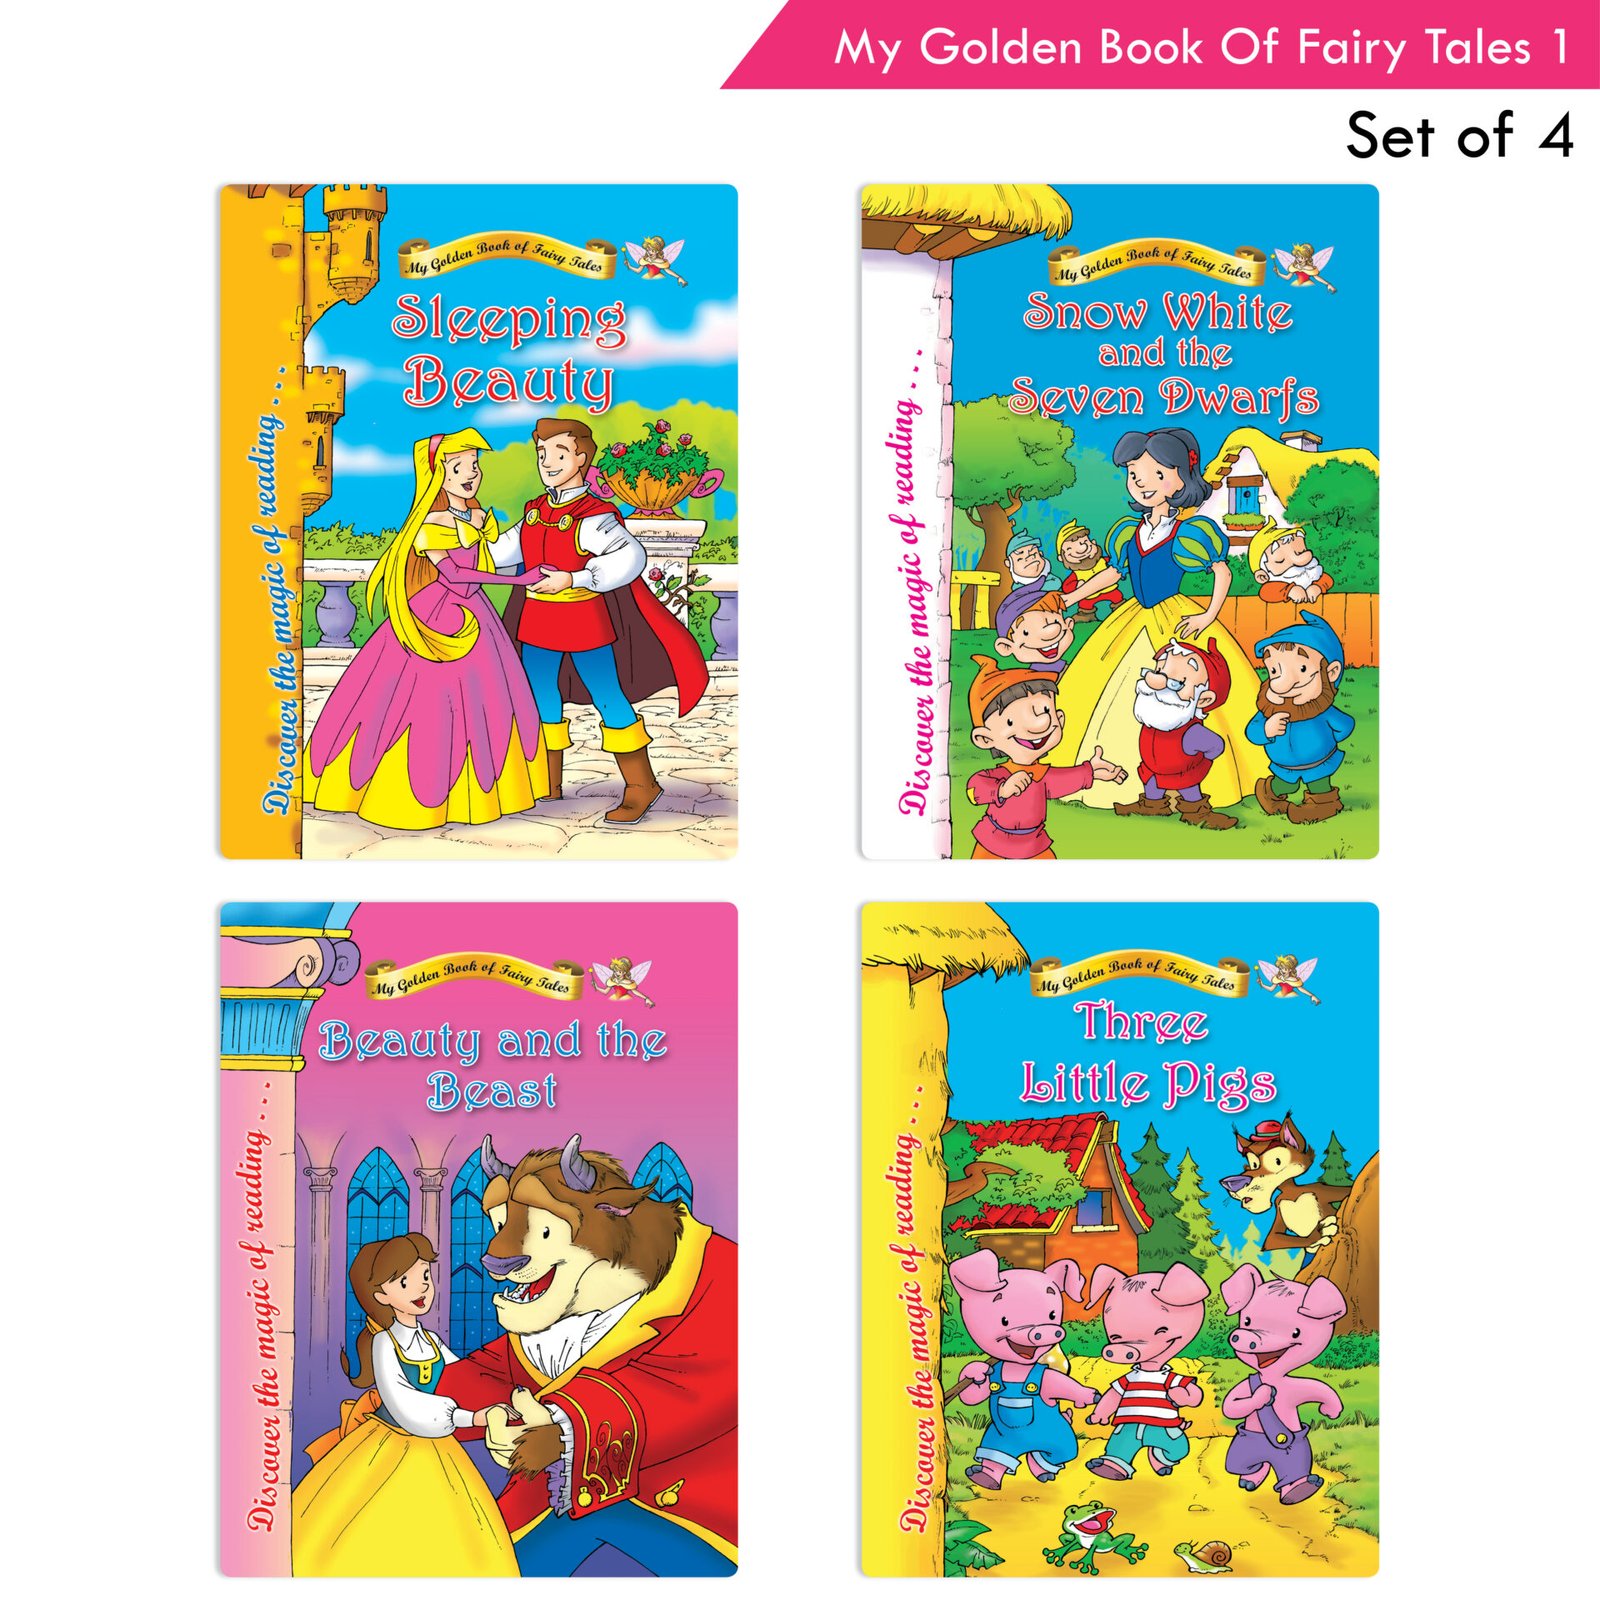 My Golden Book Of Fairy Tales 1 Set of 4 1